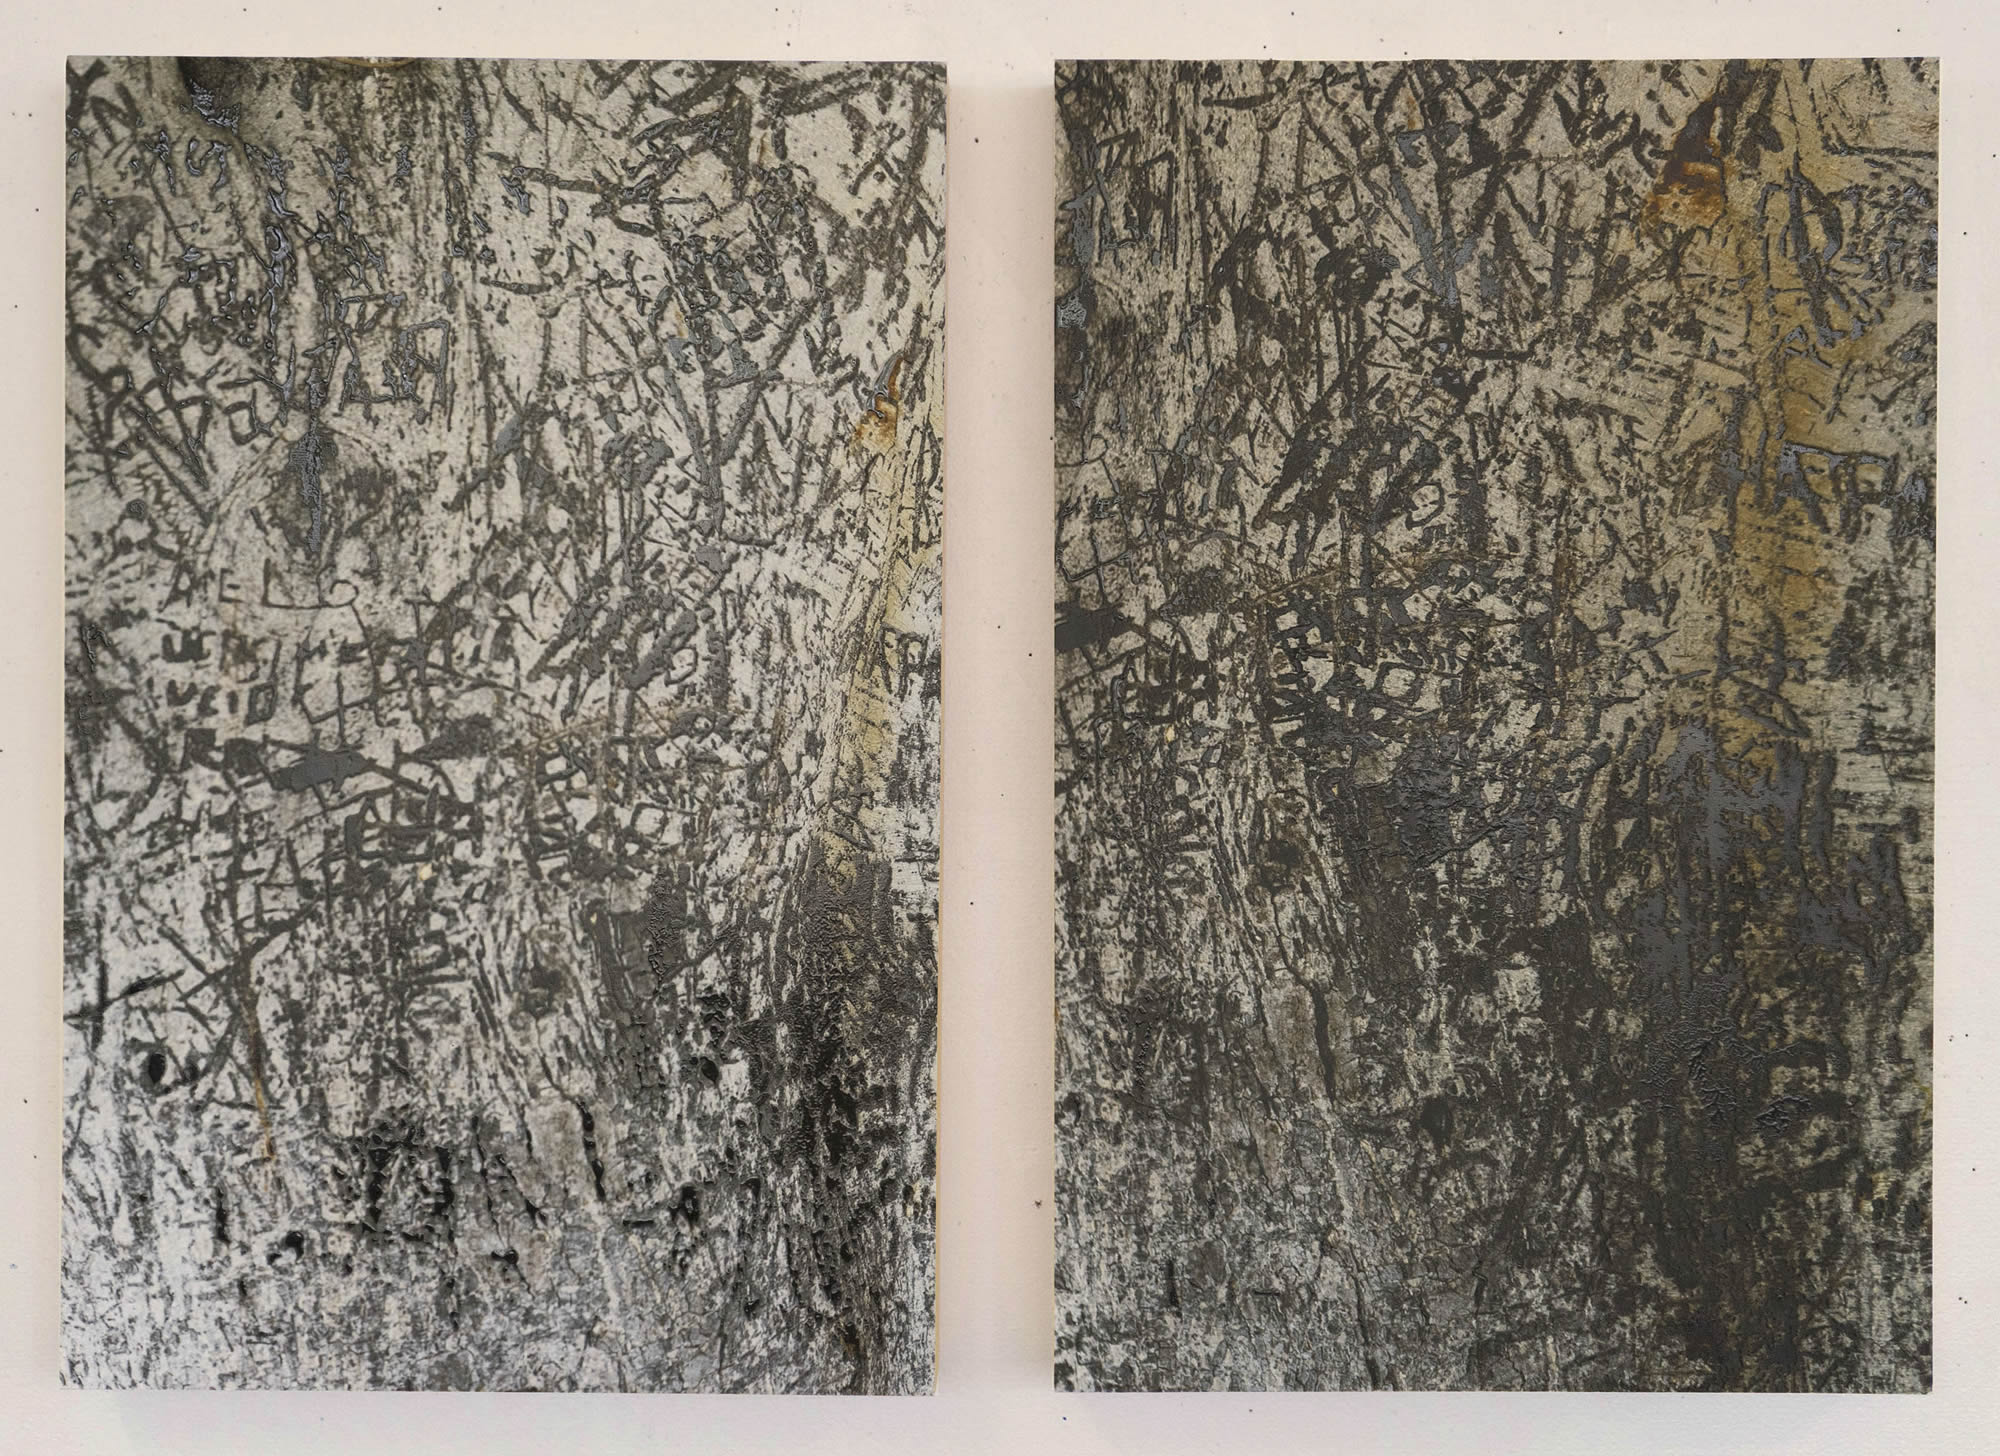 Untitled (Ficus_Los Angeles_20151230_34°03'29.2"N 118°18'28.2"W [K-Town Diptych])